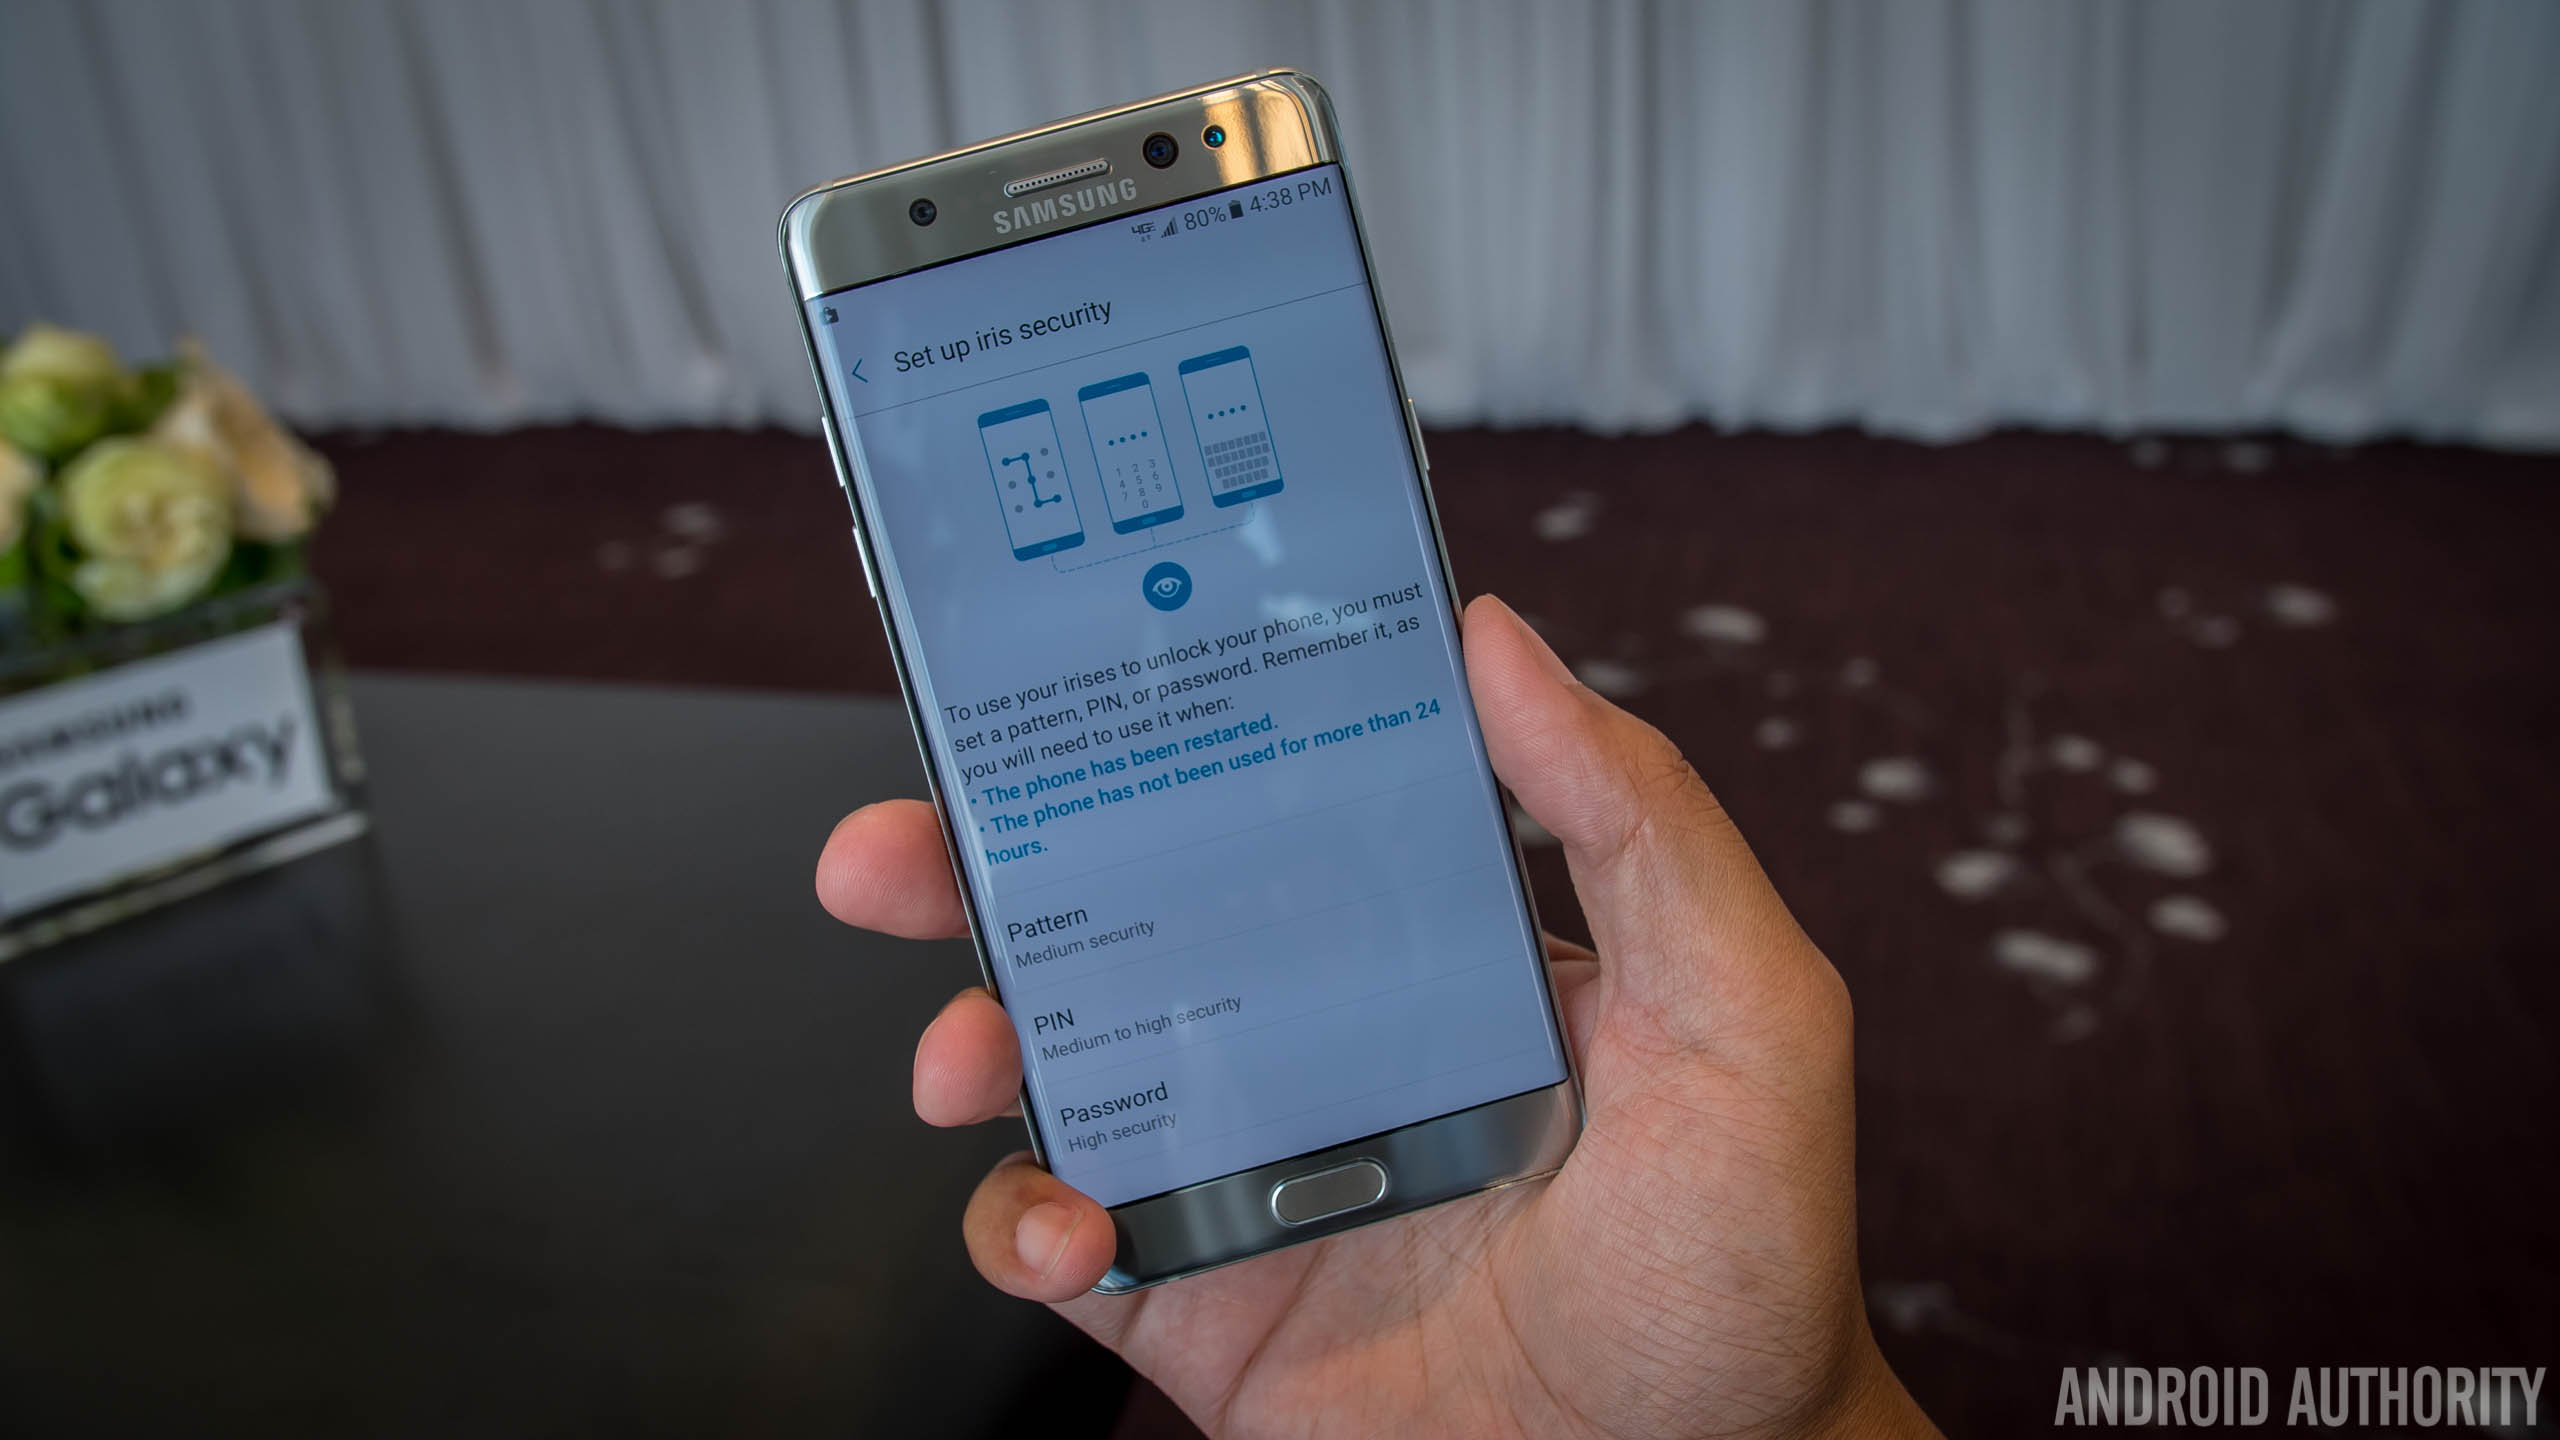 Samsung-Galaxy-Note-7-hands-on-first-batch-AA-(16-of-47)